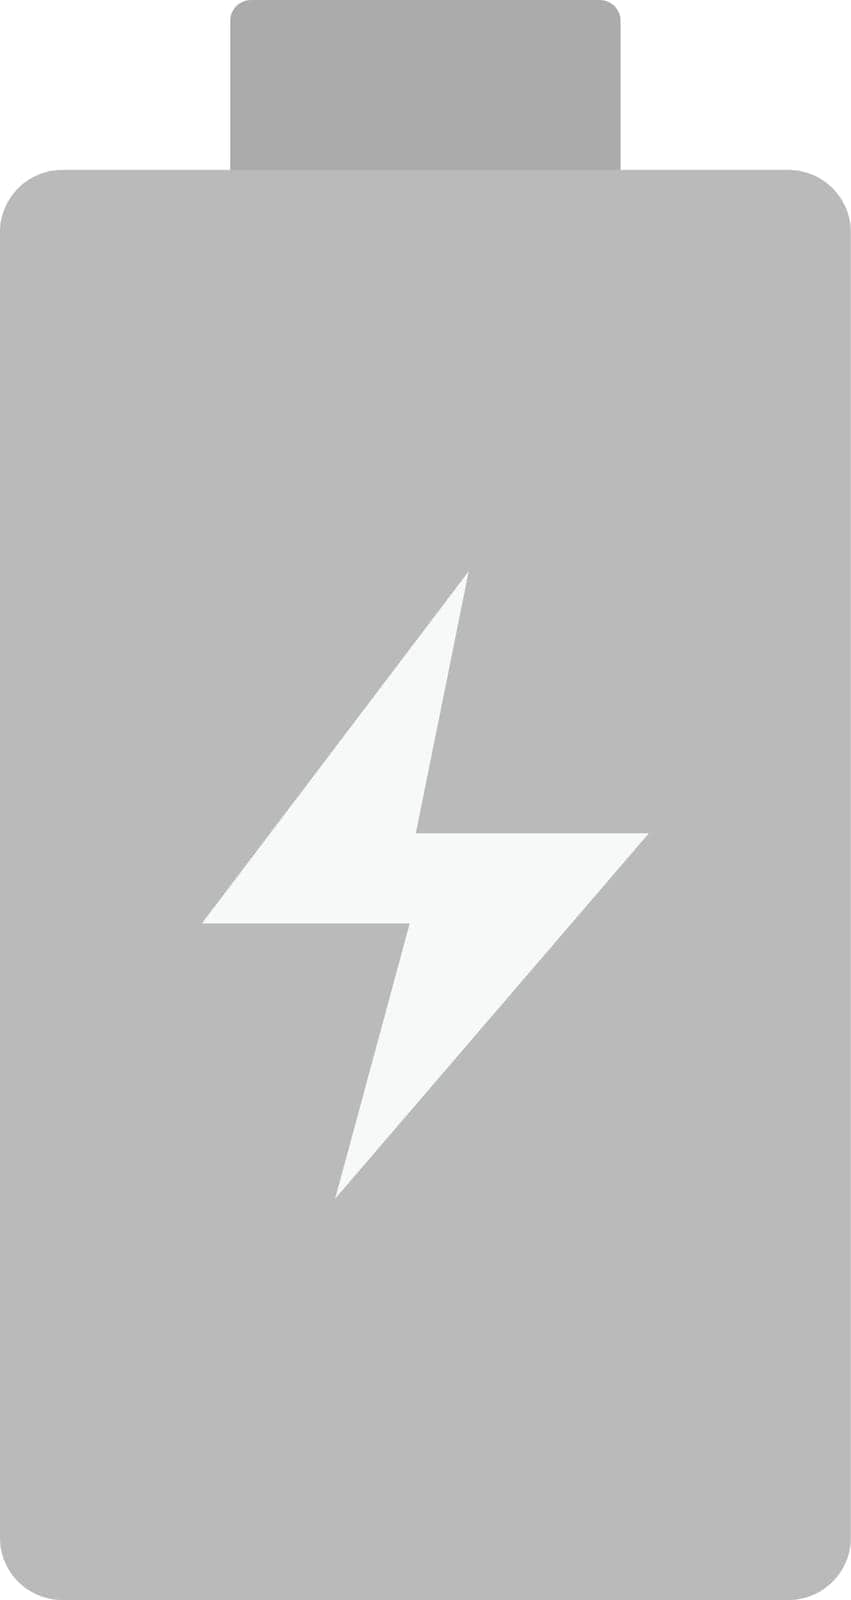 Battery Indicator icon vector image. Suitable for mobile application web application and print media.